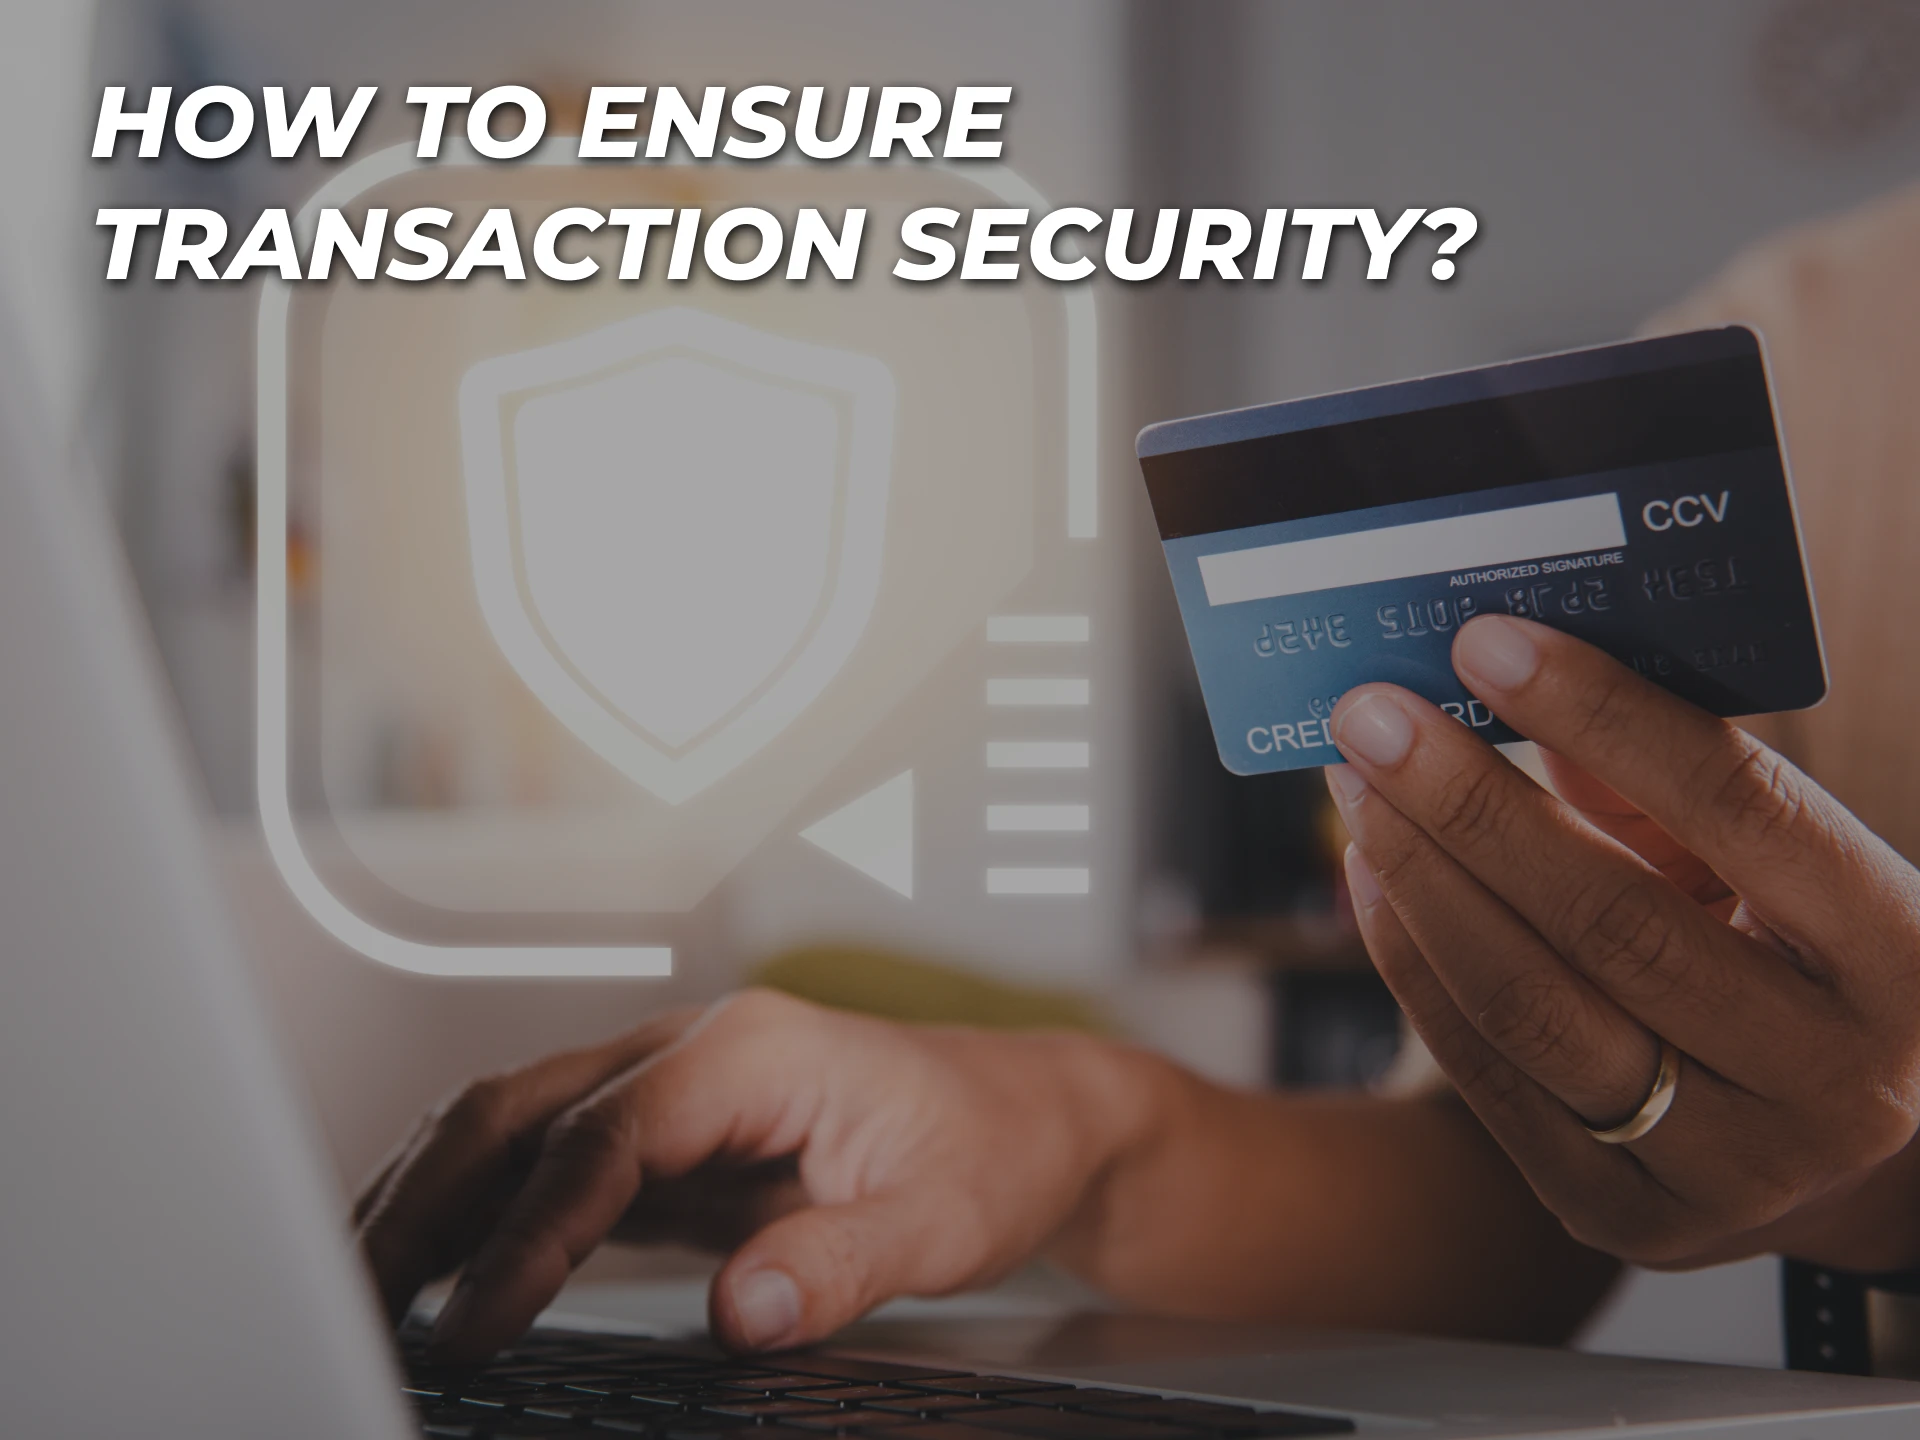 Use these tips to ensure your transactions are secure.